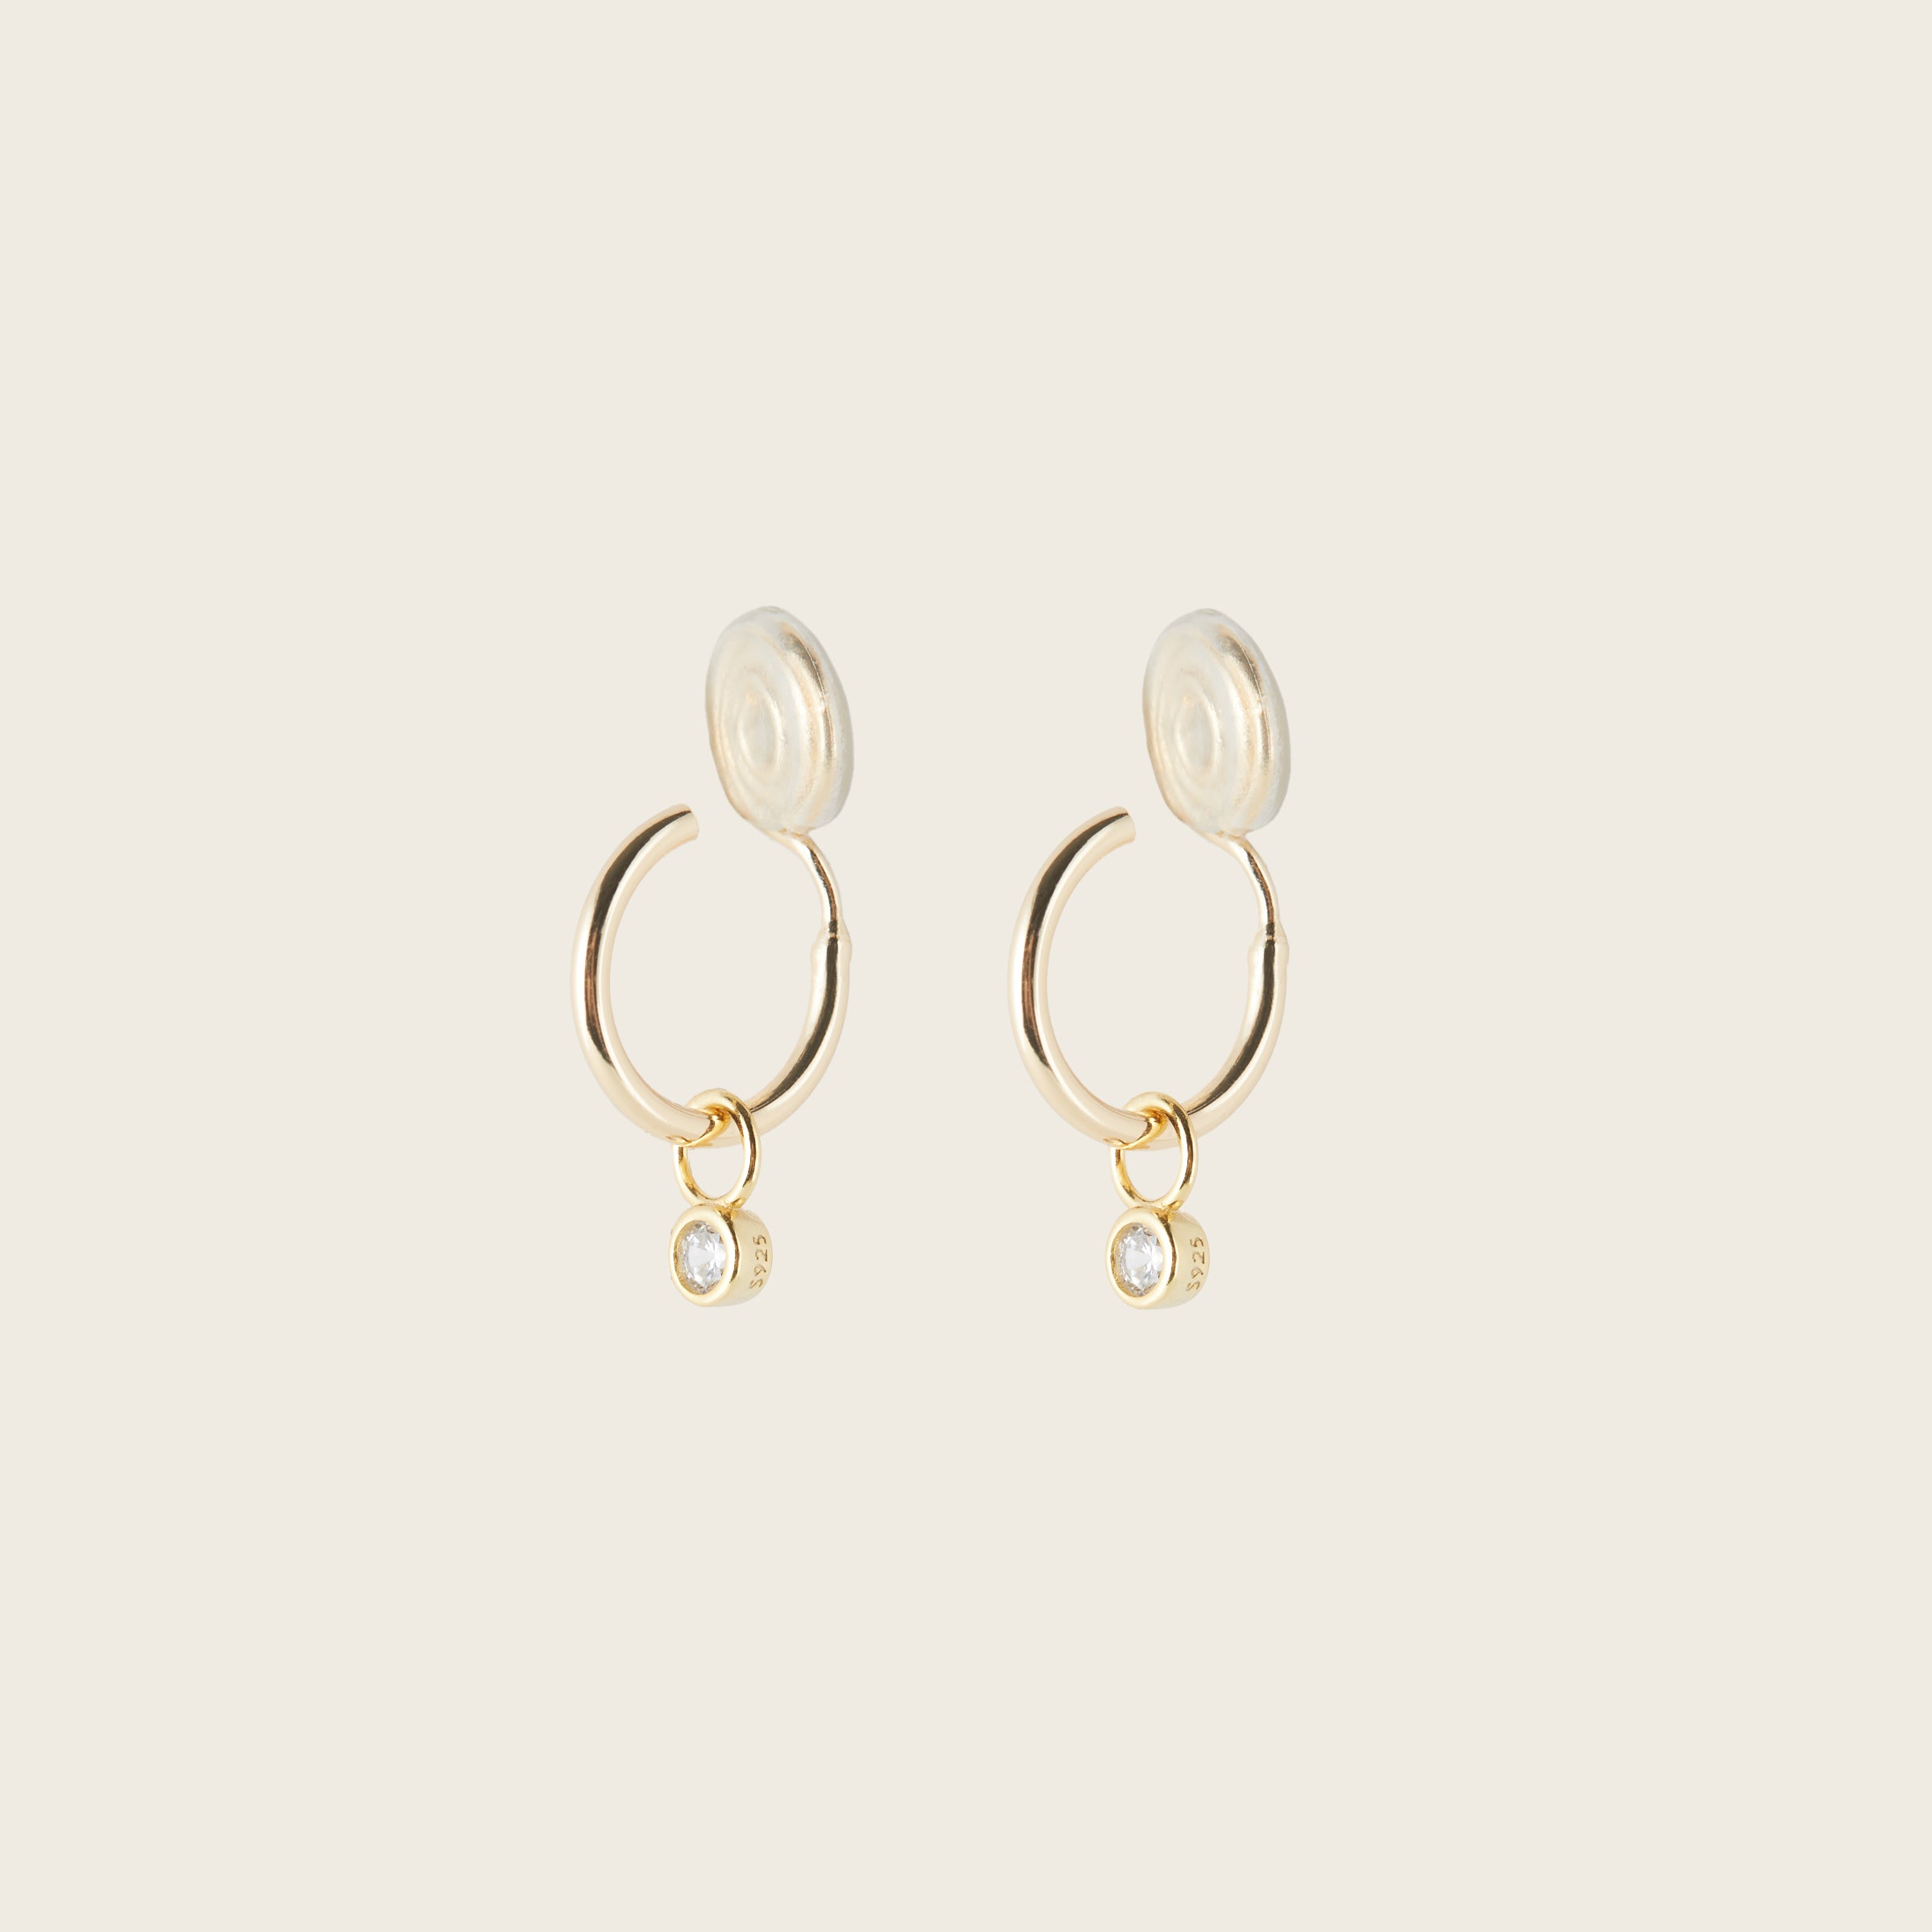 Image of the Mini Gemstone Hoop Charms are made with high-quality materials, including 18K gold plating over 925 Sterling Silver. These charms are both non-tarnish and water resistant. The perfect combination of style and durability.